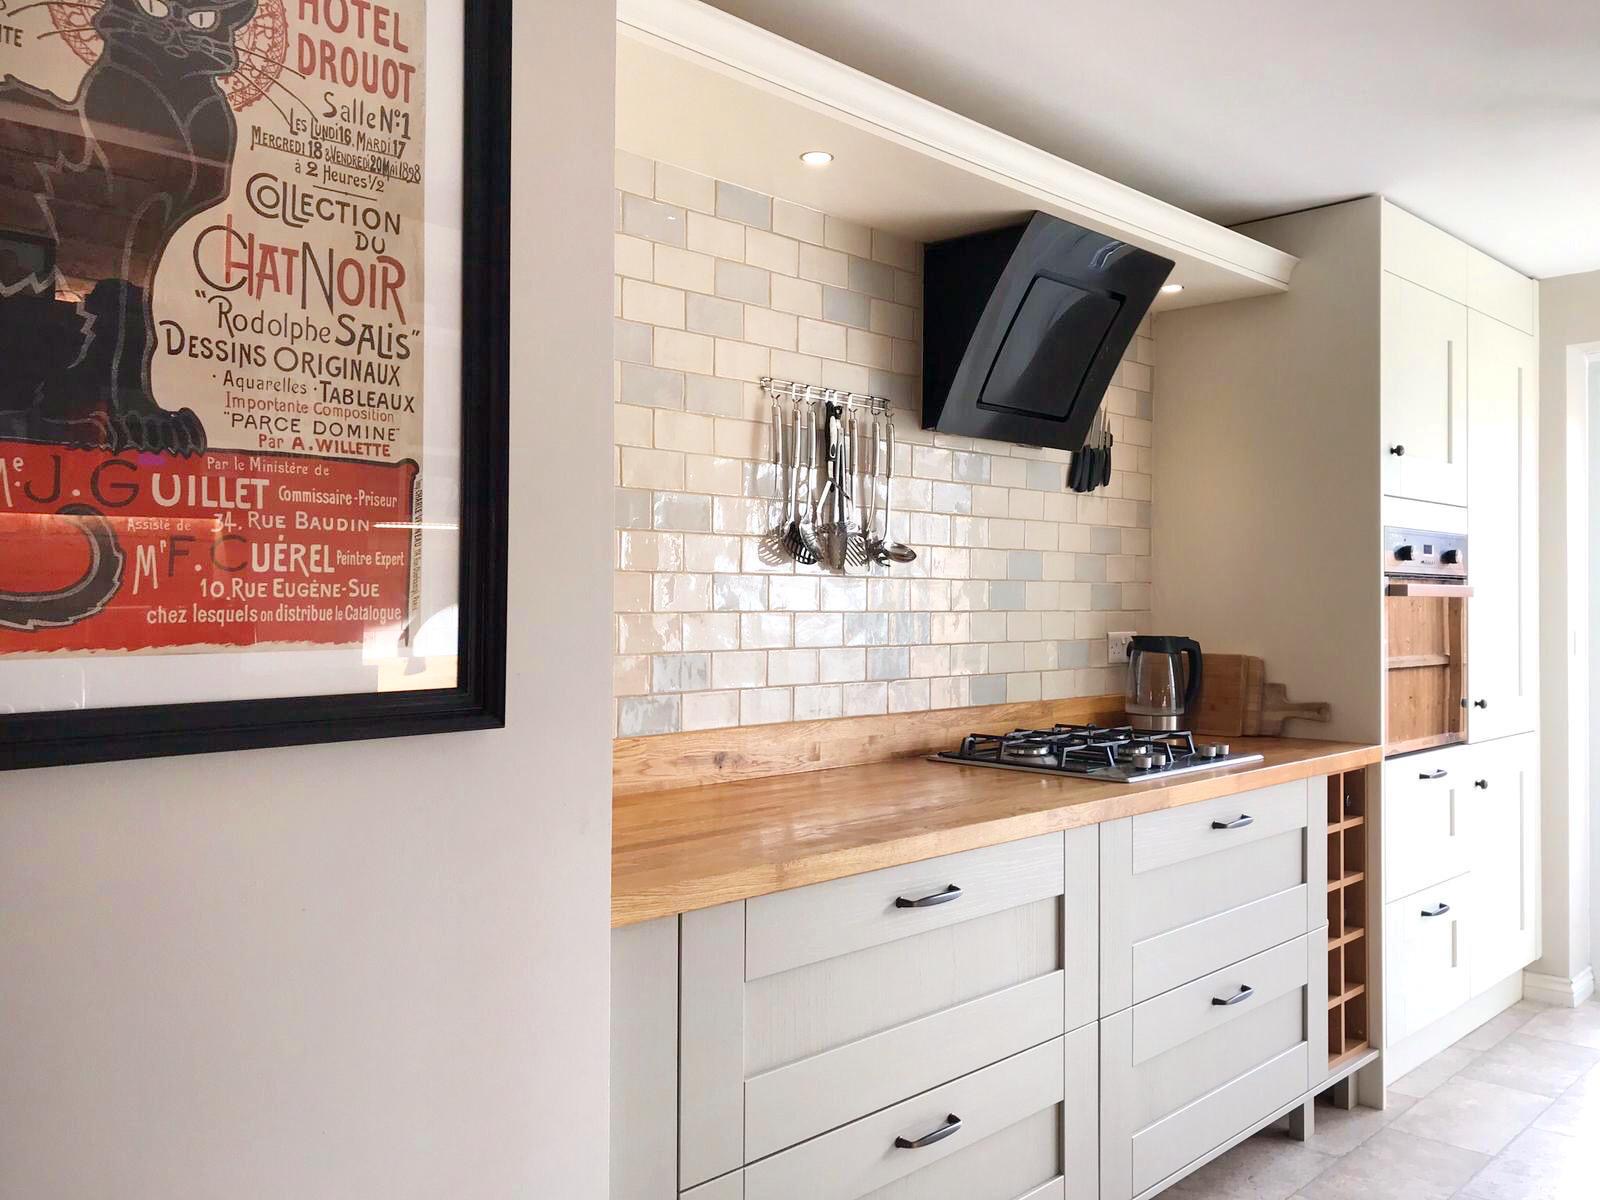 Do I really need an extractor hood in my kitchen? - Jacob Roberts Interiors